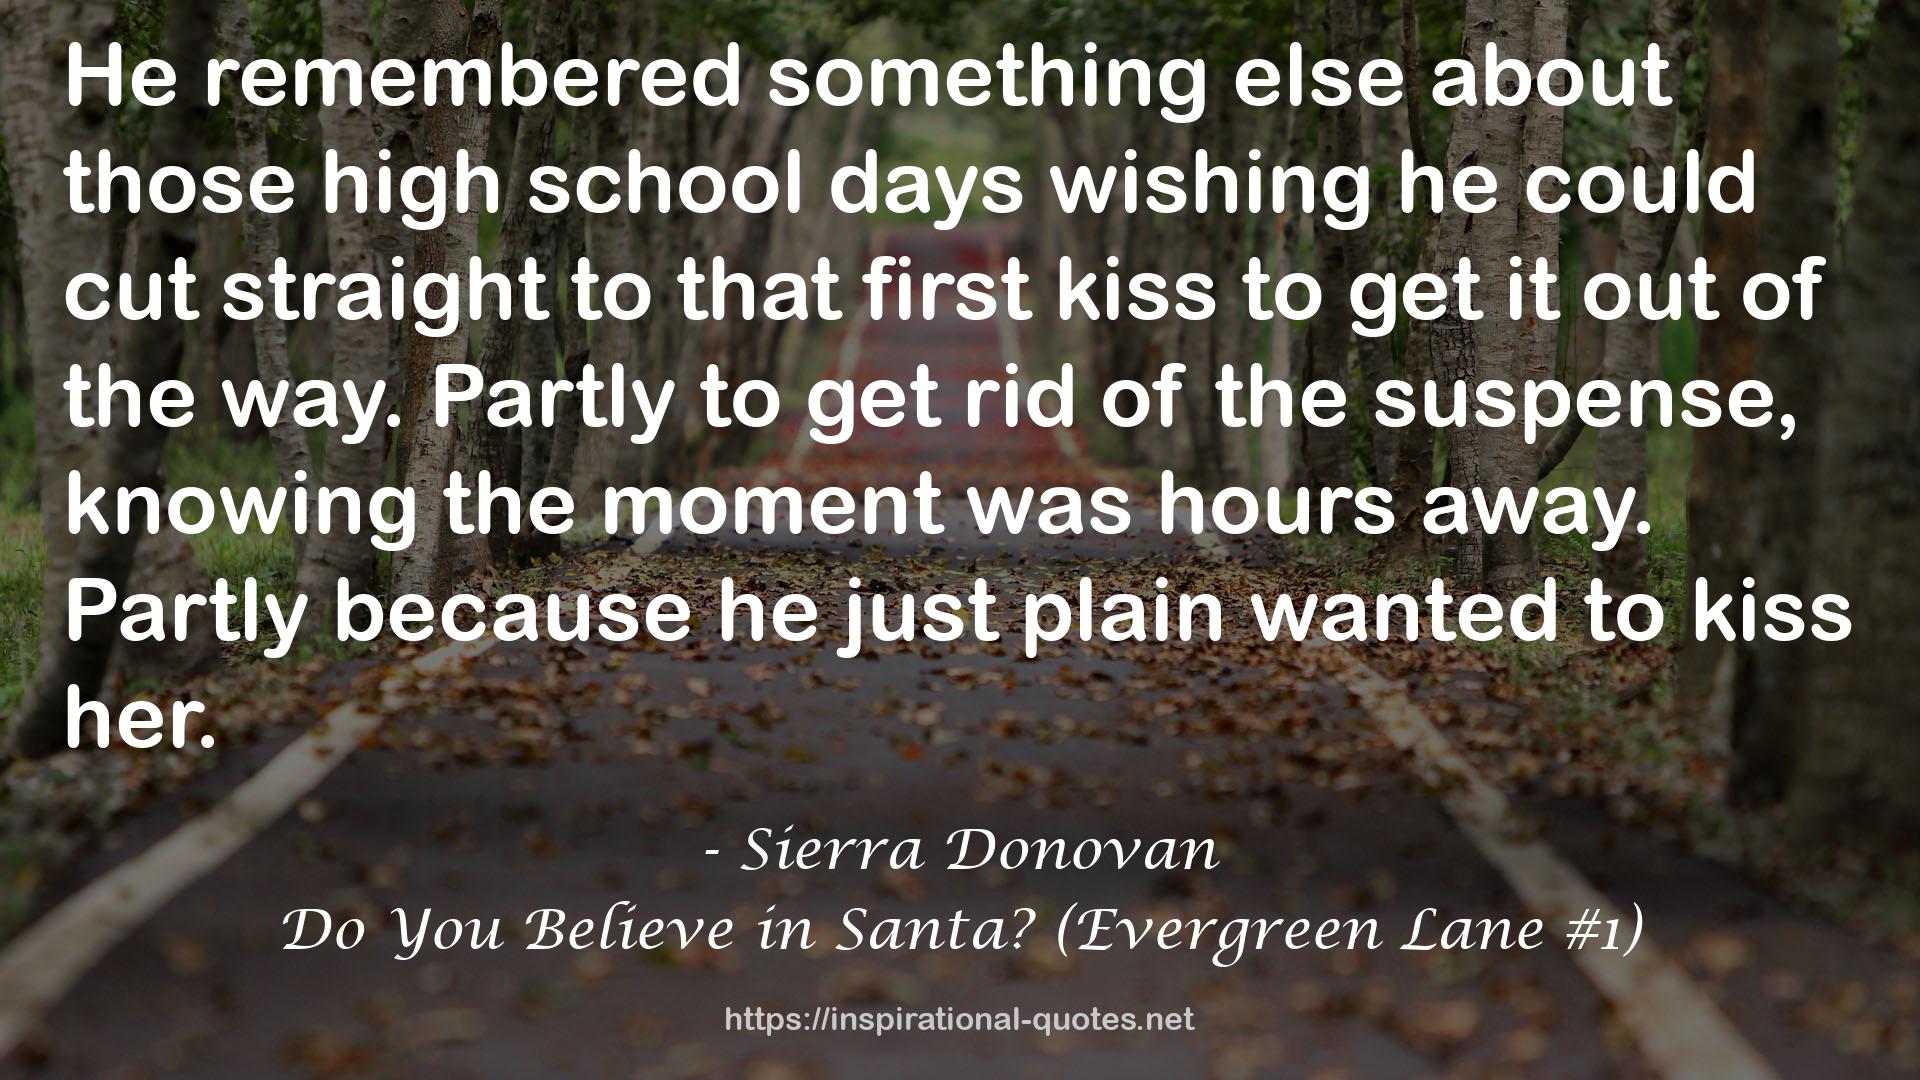 Do You Believe in Santa? (Evergreen Lane #1) QUOTES